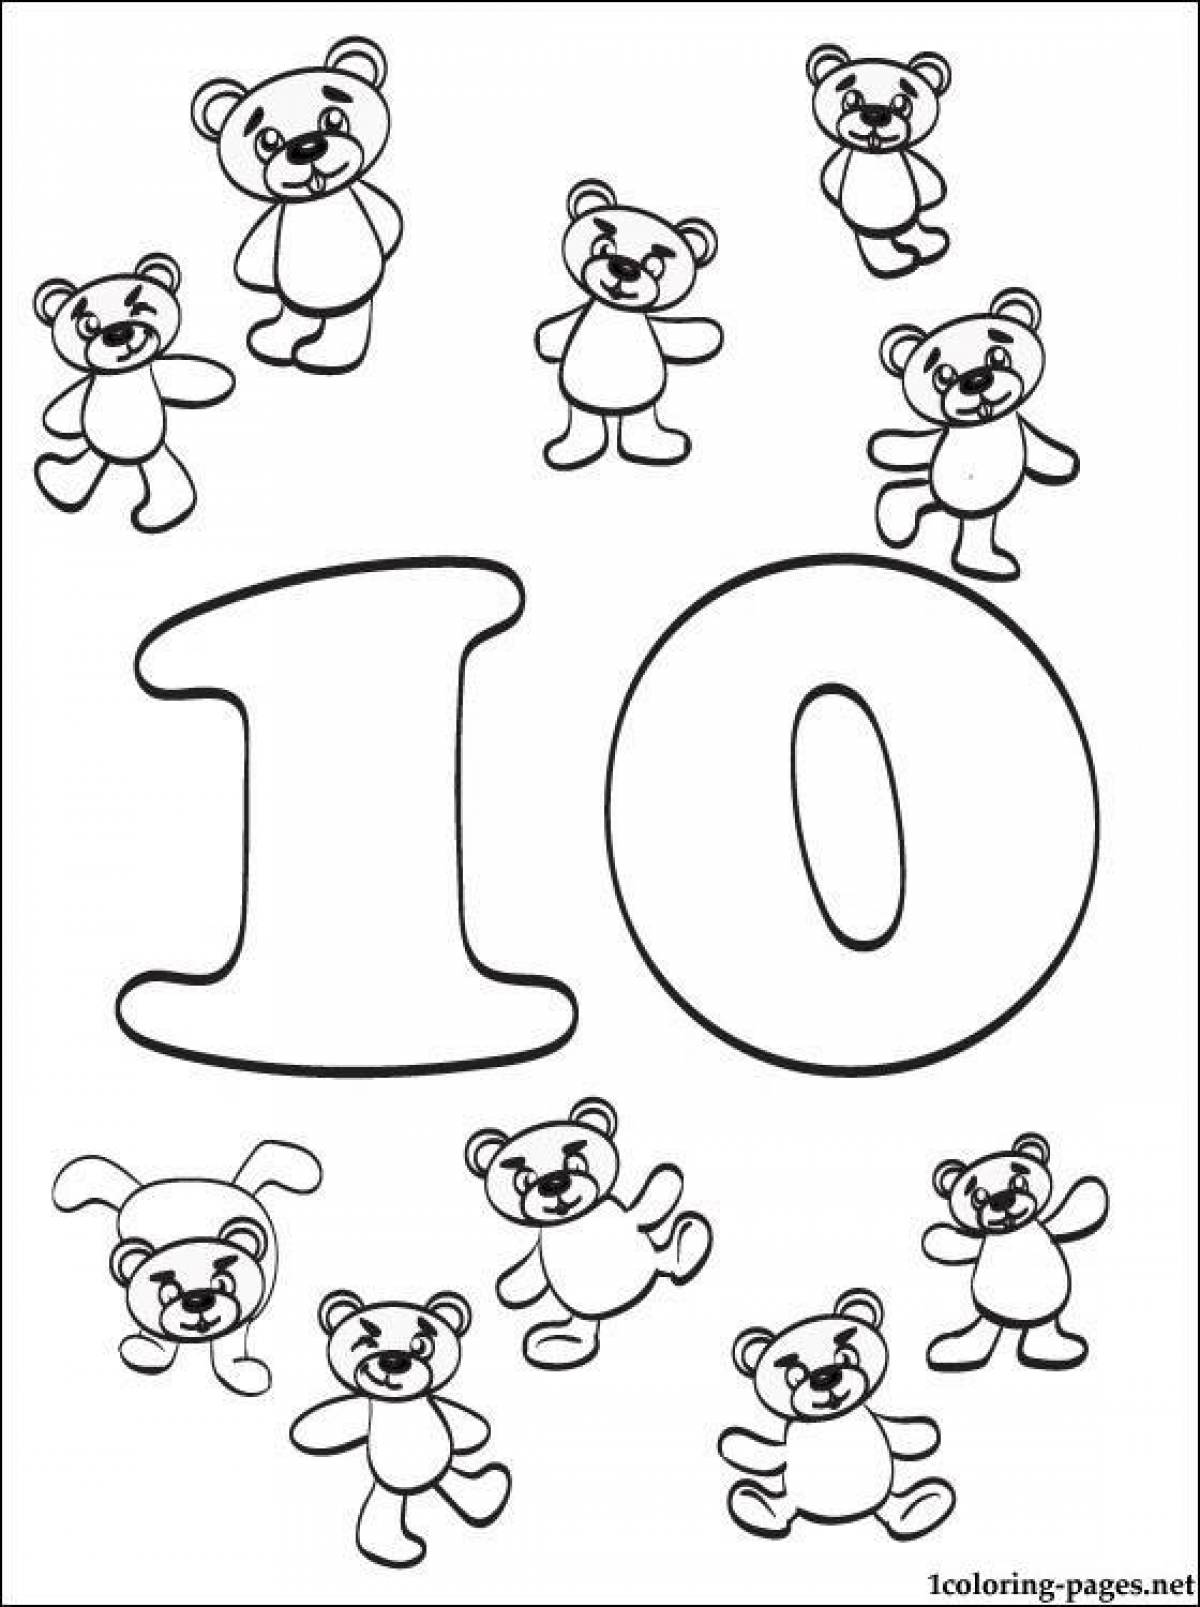 Bright coloring page 10